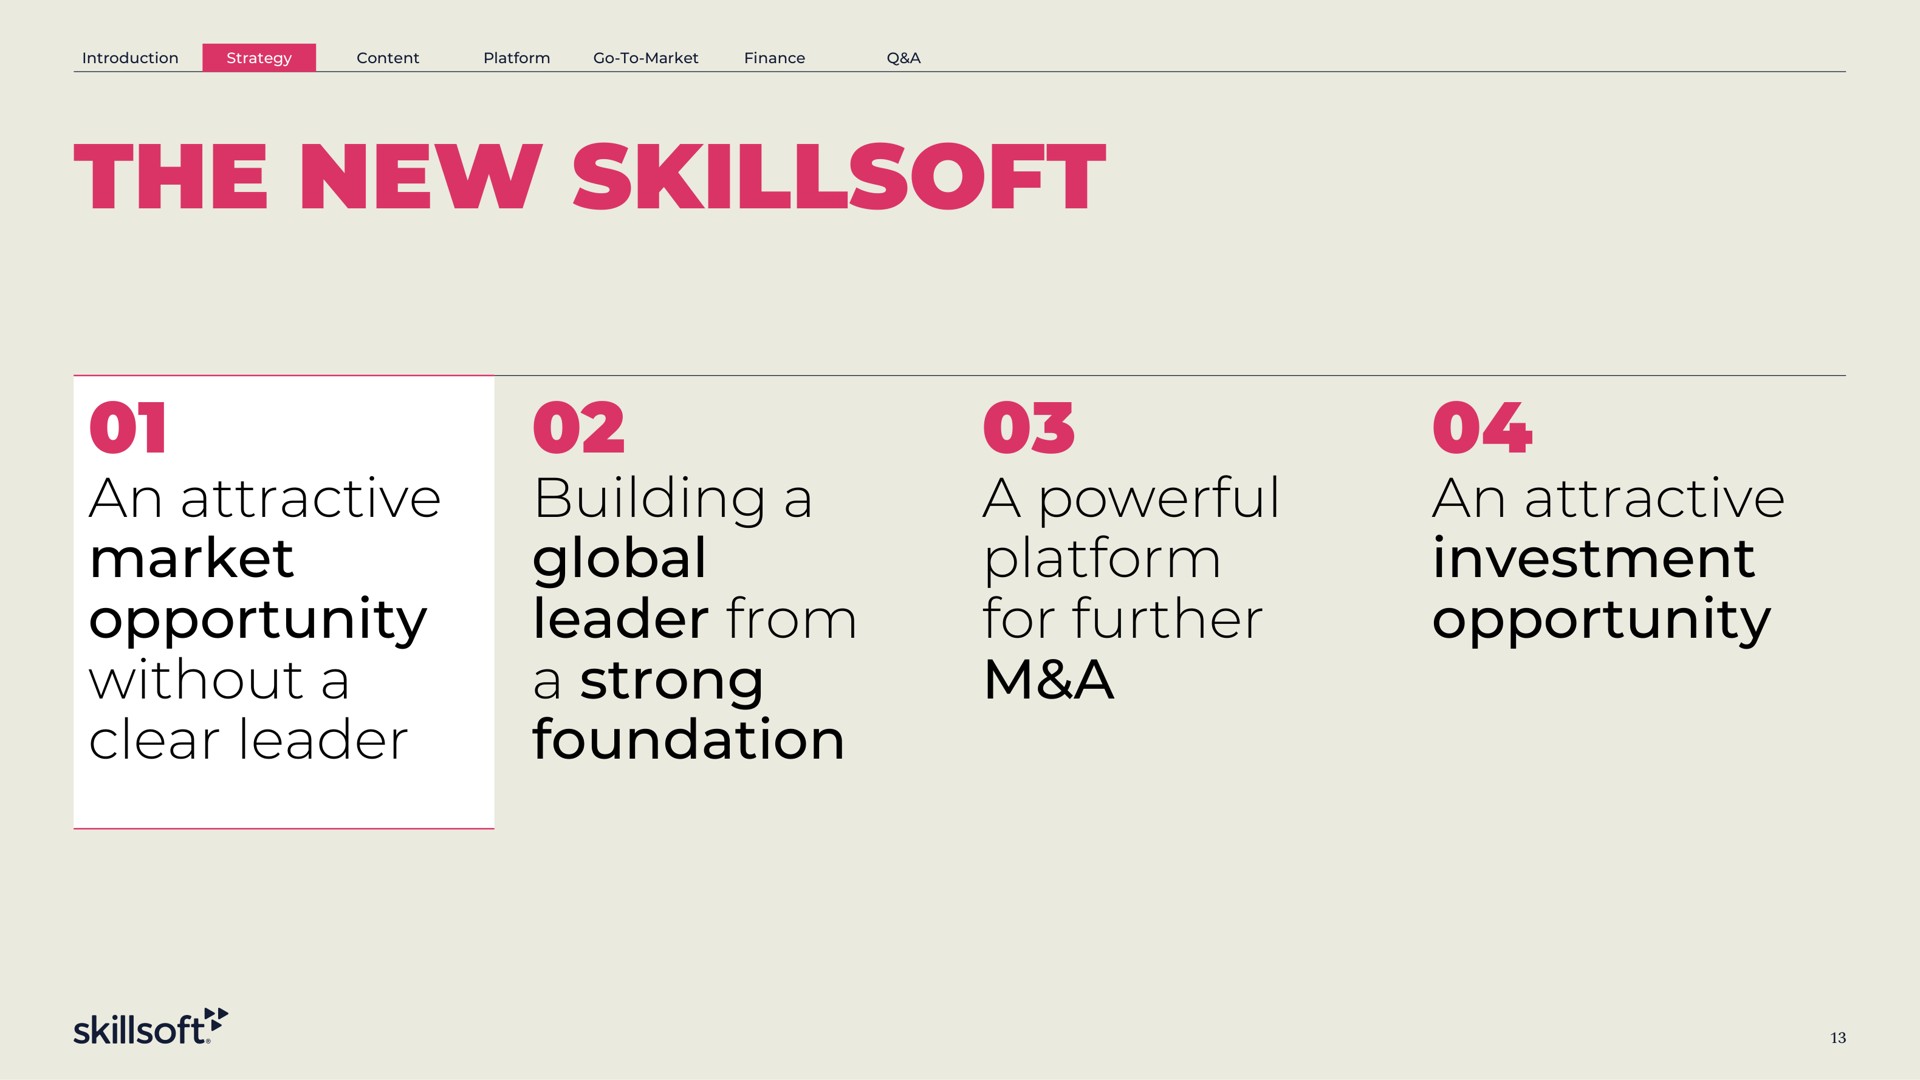 the new an attractive market opportunity without a clear leader building a global leader from a strong foundation a powerful platform for further a an attractive investment opportunity | Skillsoft